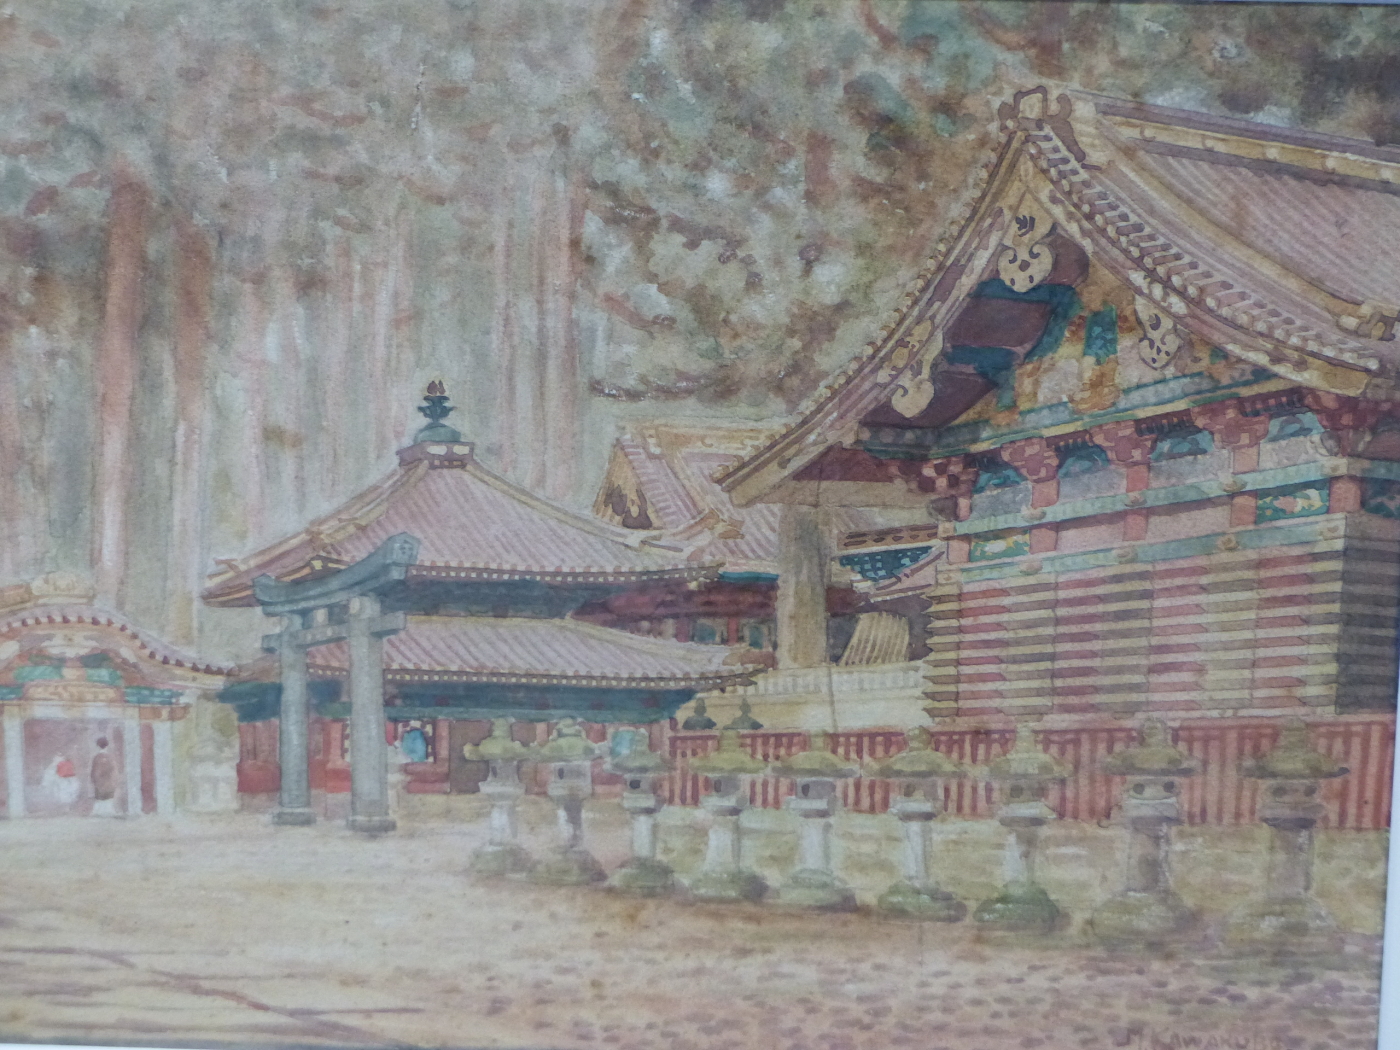 M. KAWAKUBO. EARLY 20th.C. JAPANESE SCHOOL. TEMPLES AMIDST WOODLAND. SIGNED WATERCOLOUR. 23 x - Image 2 of 4